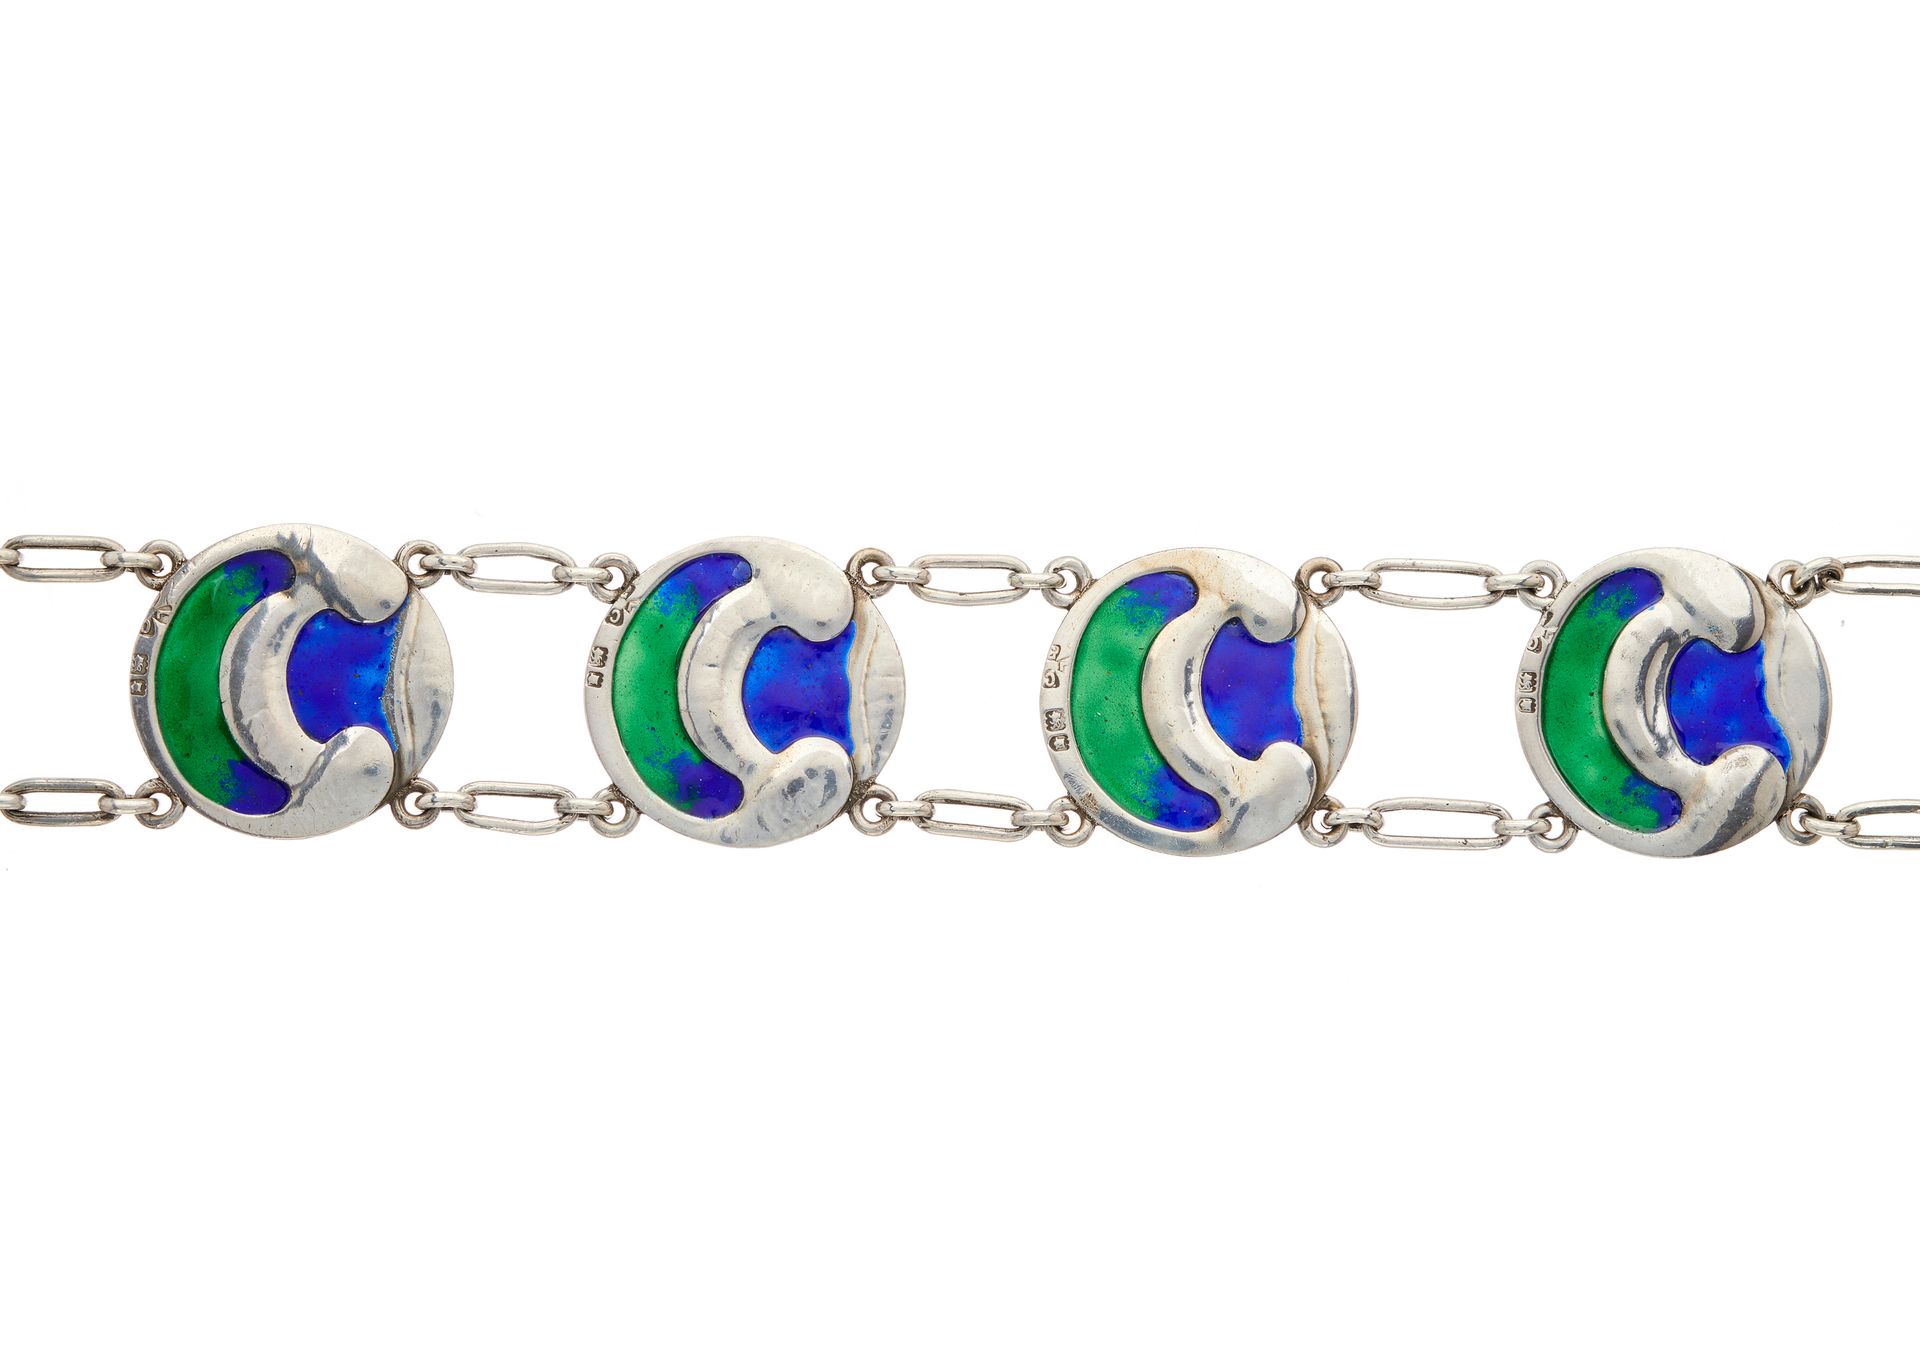 Null Kate Harris for W. G. Connell, an Arts & Crafts silver and enamel bracelet,&hellip;